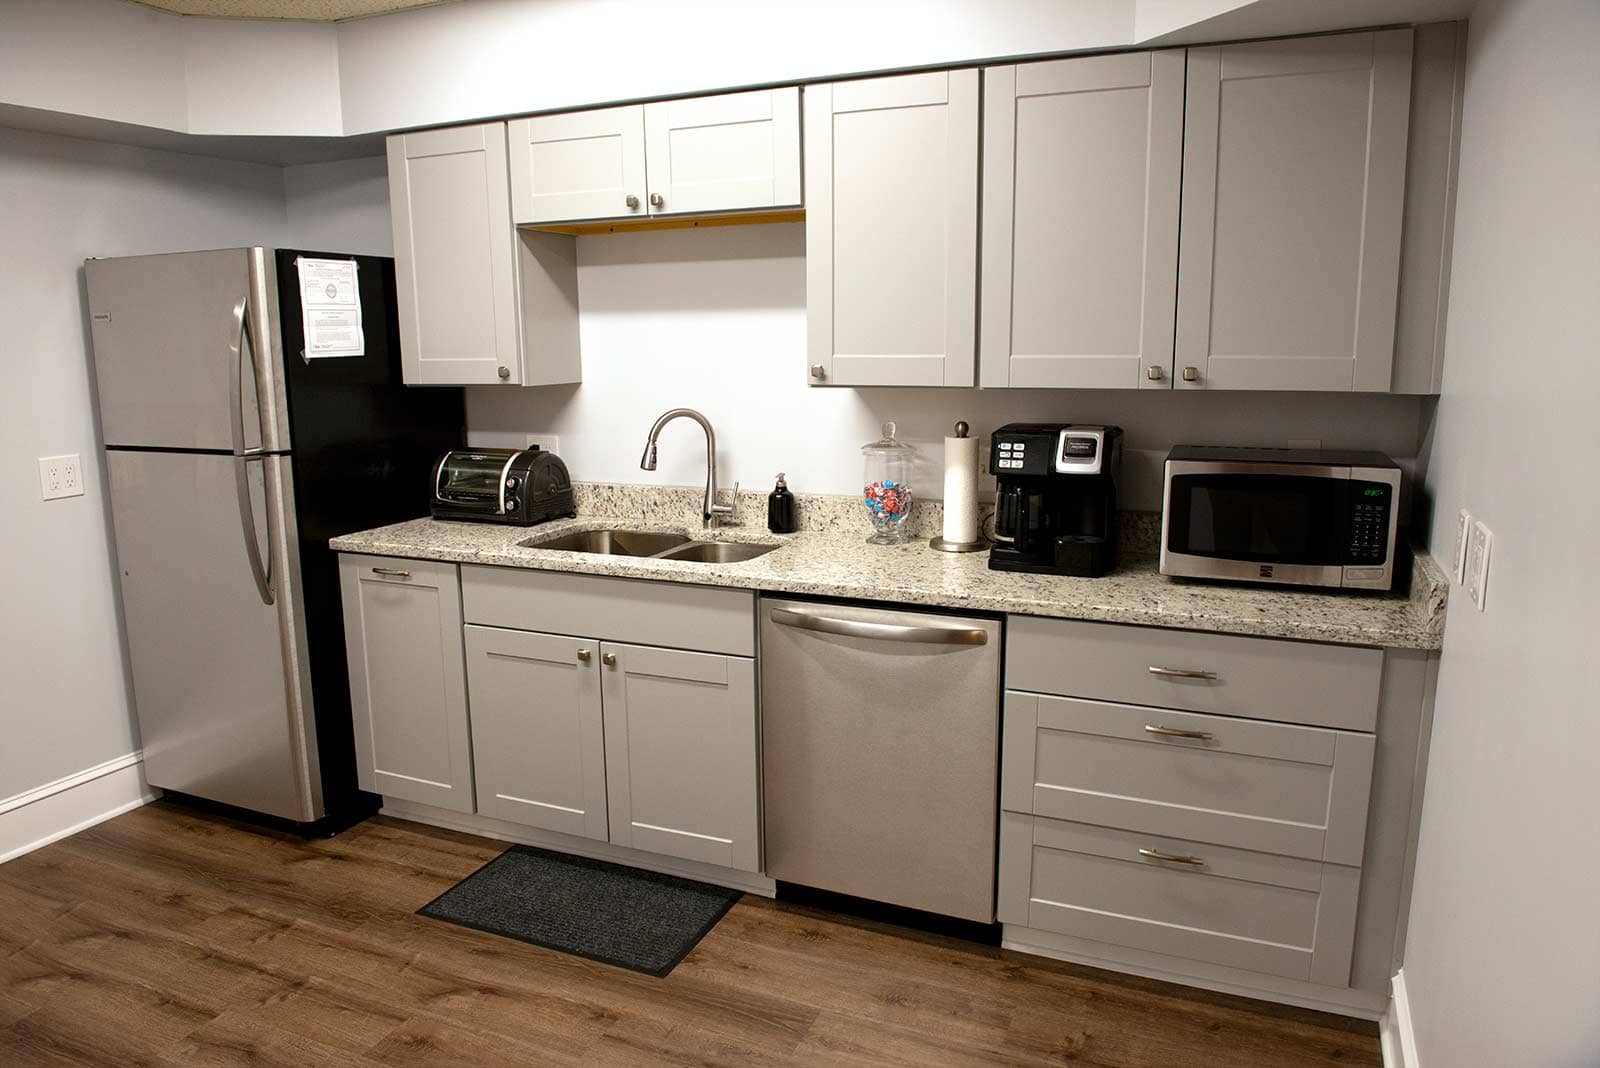 Shared Office Space - Newly Remodeled Kitchen